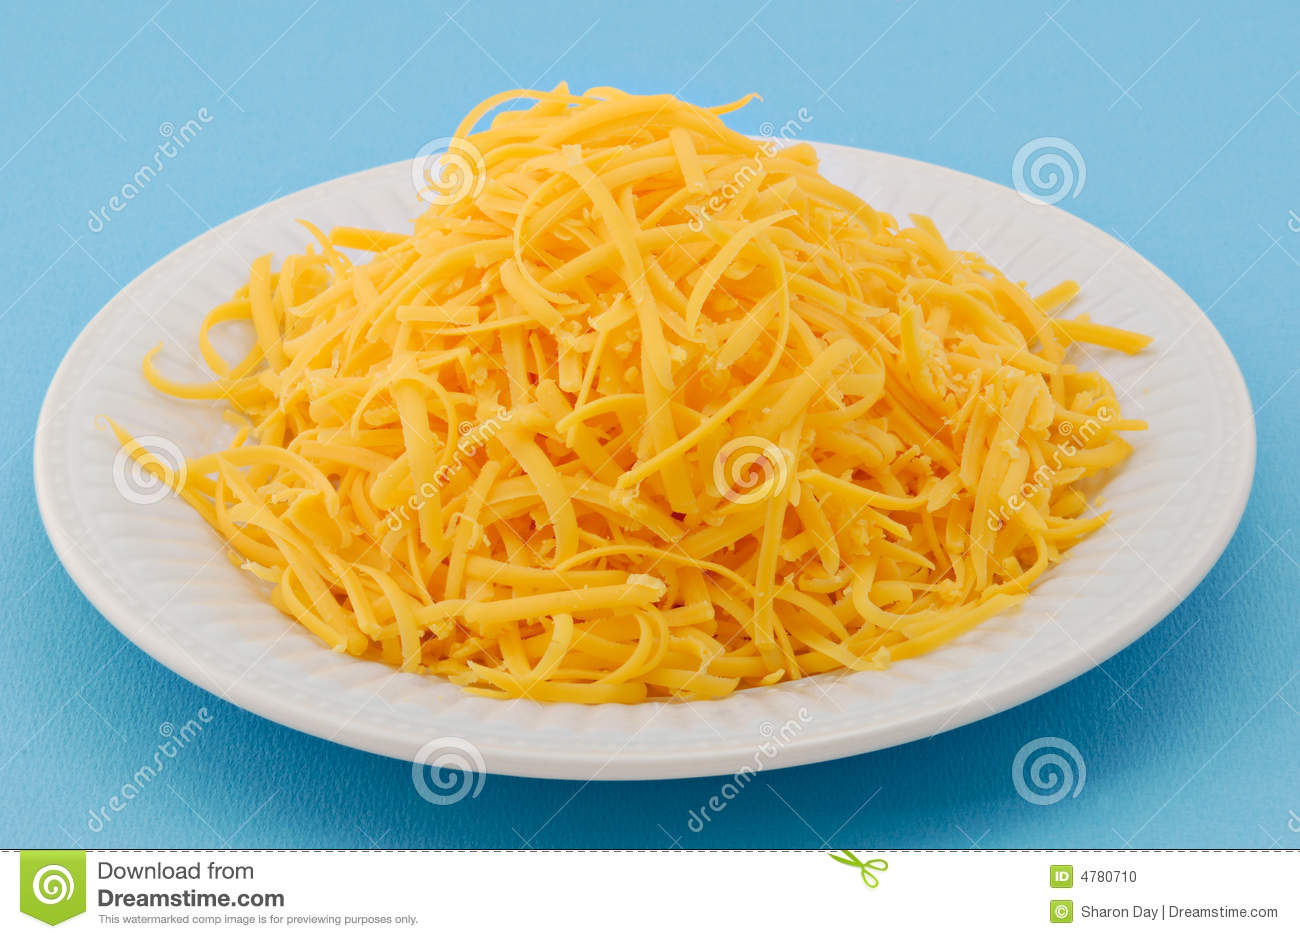 Shredded Cheddar Cheese Stock Photo   Image  4780710